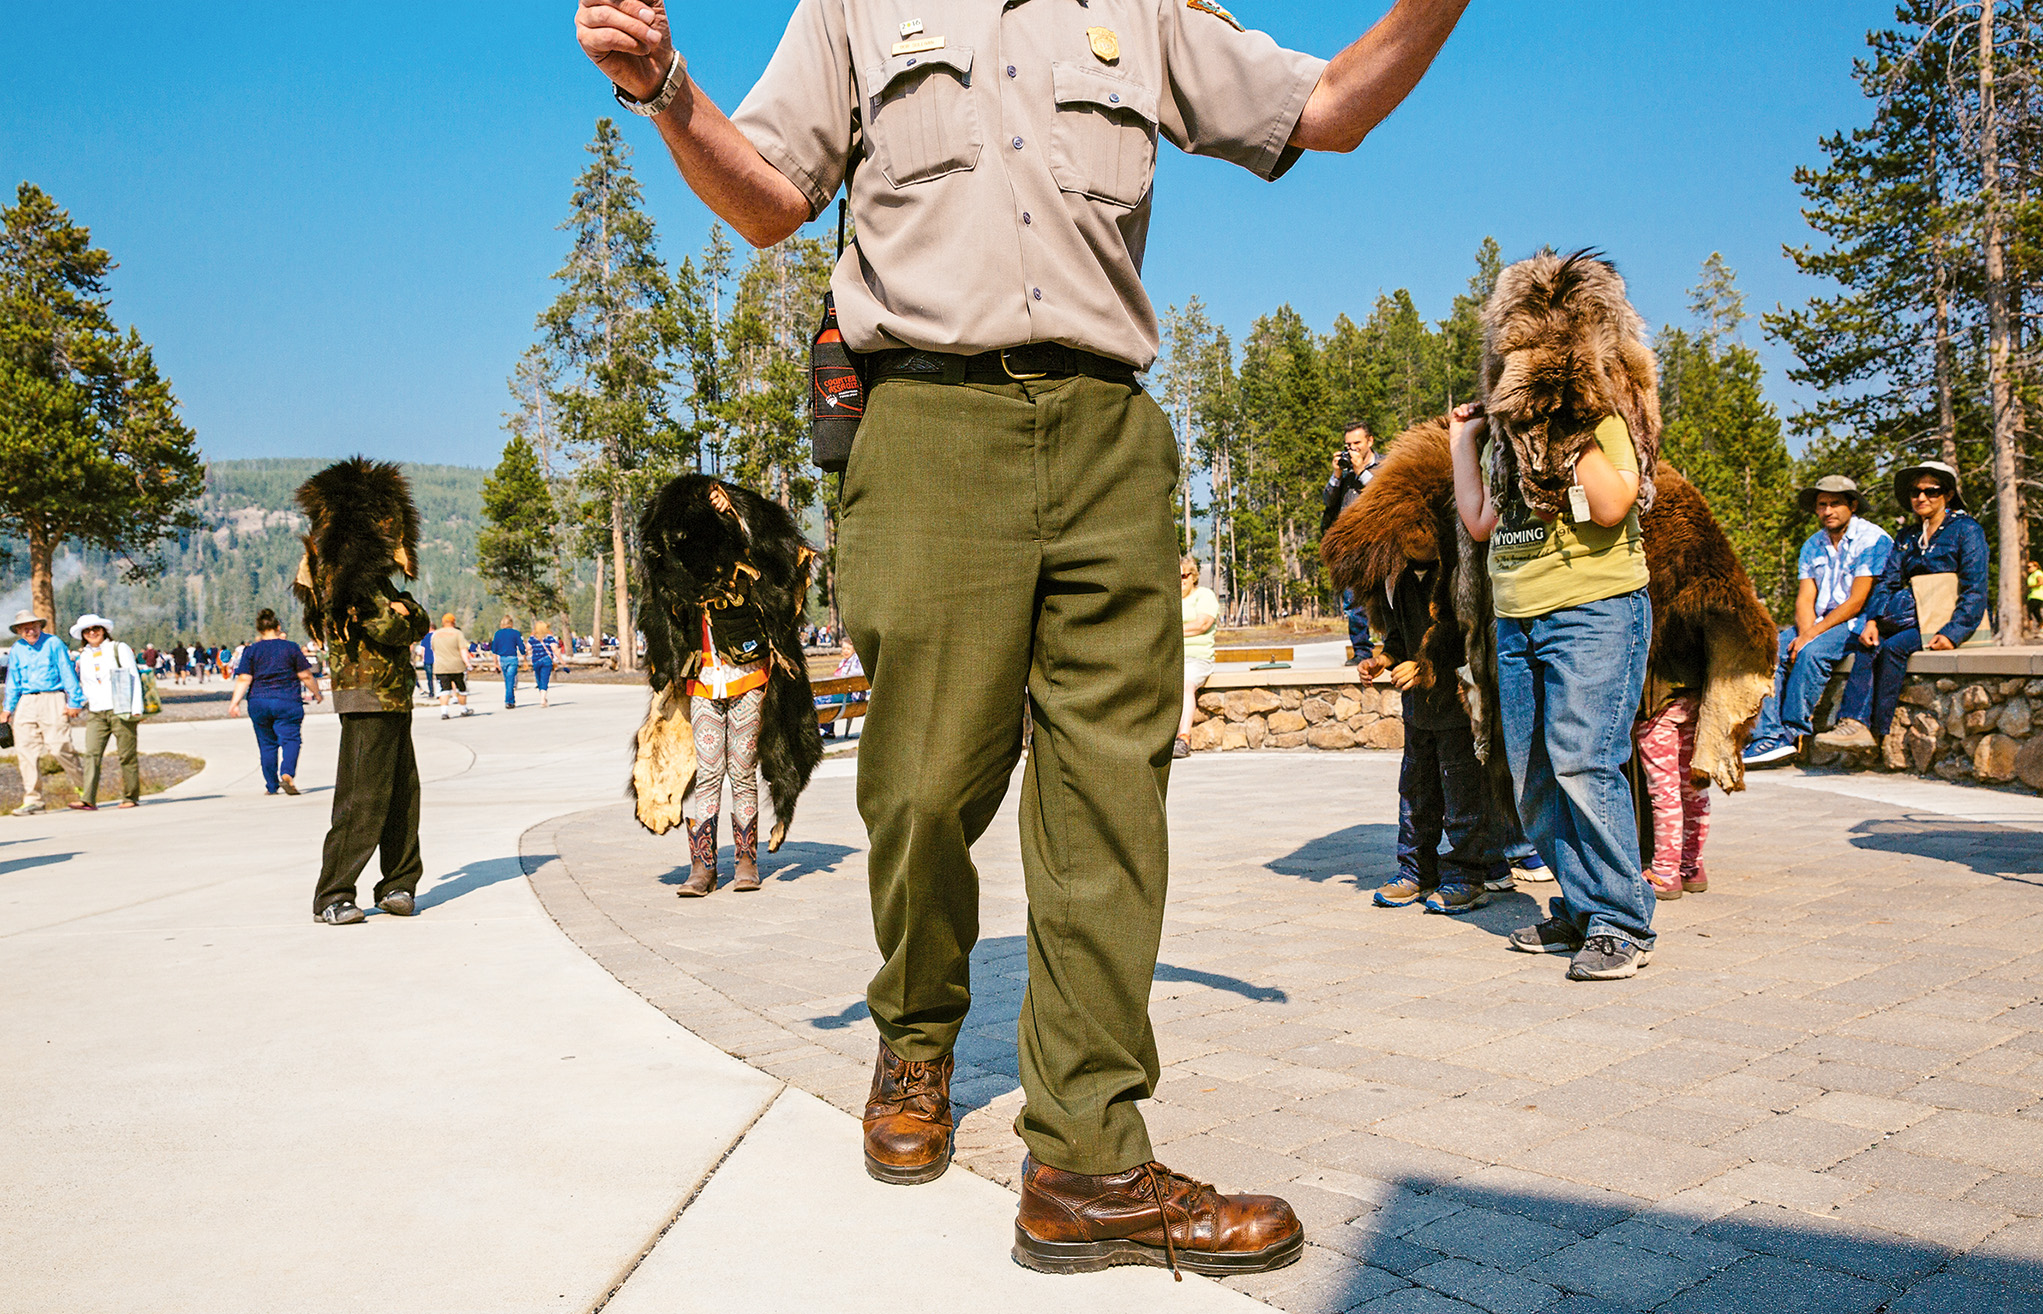 A bear-safety demonstration at Yellowstone National Park